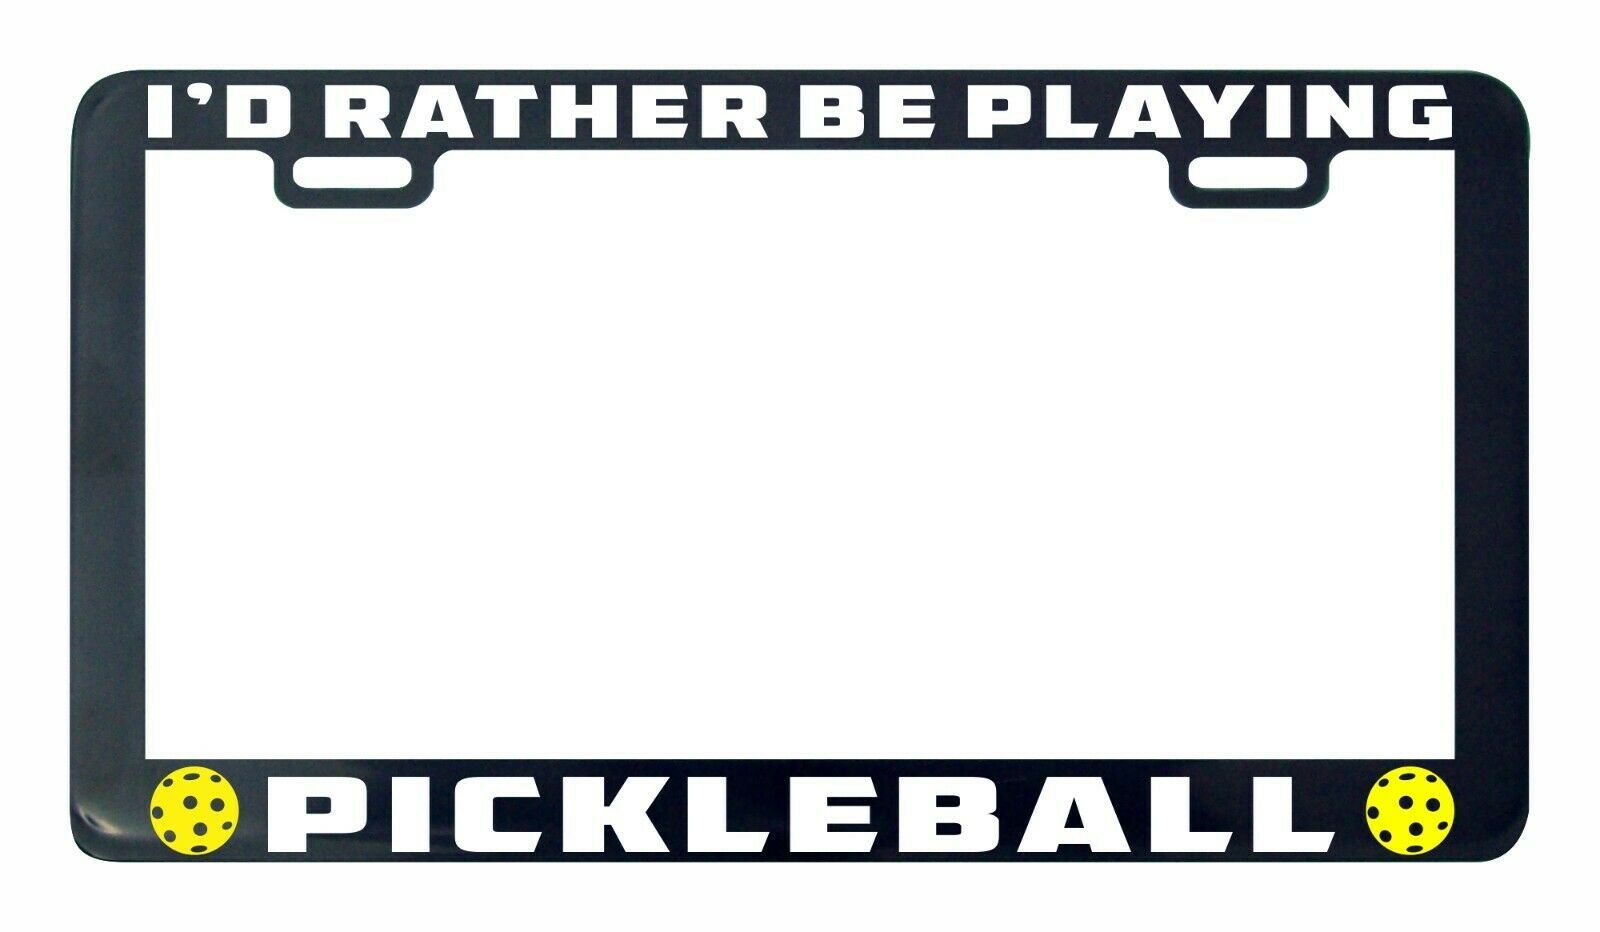 Primary image for I'd rather be playing pickleball license plate Frame holder tag legal